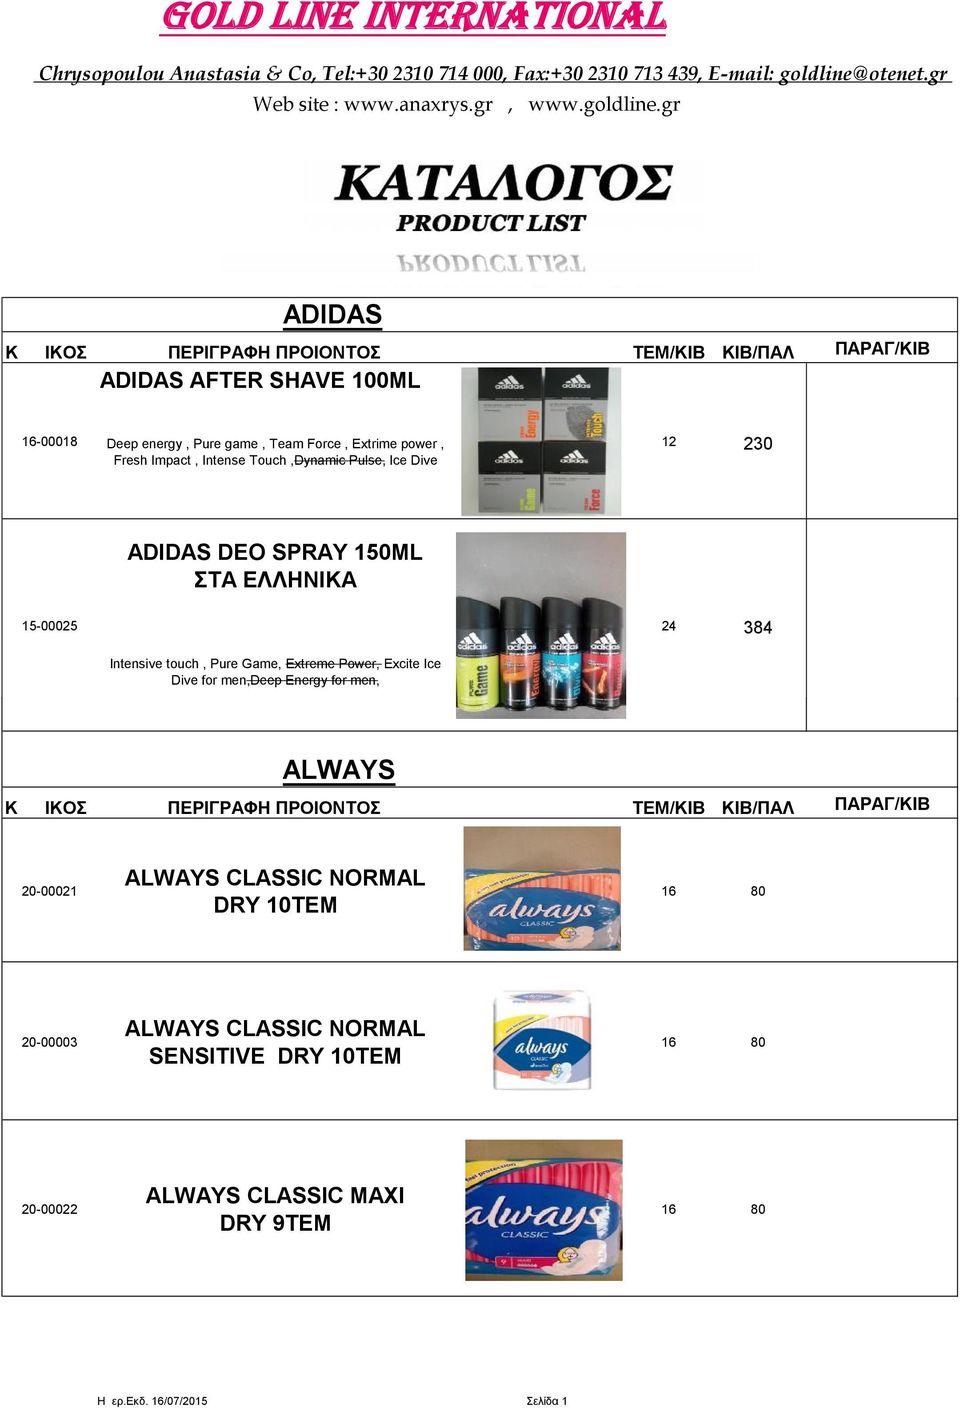 gr ADIDAS ADIDAS AFTER SHAVE 100ML 1-00018 Deep energy, Pure game, Team Force, Extrime power, Fresh Impact, Intense Touch,Dynamic Pulse, Ice Dive 230 384